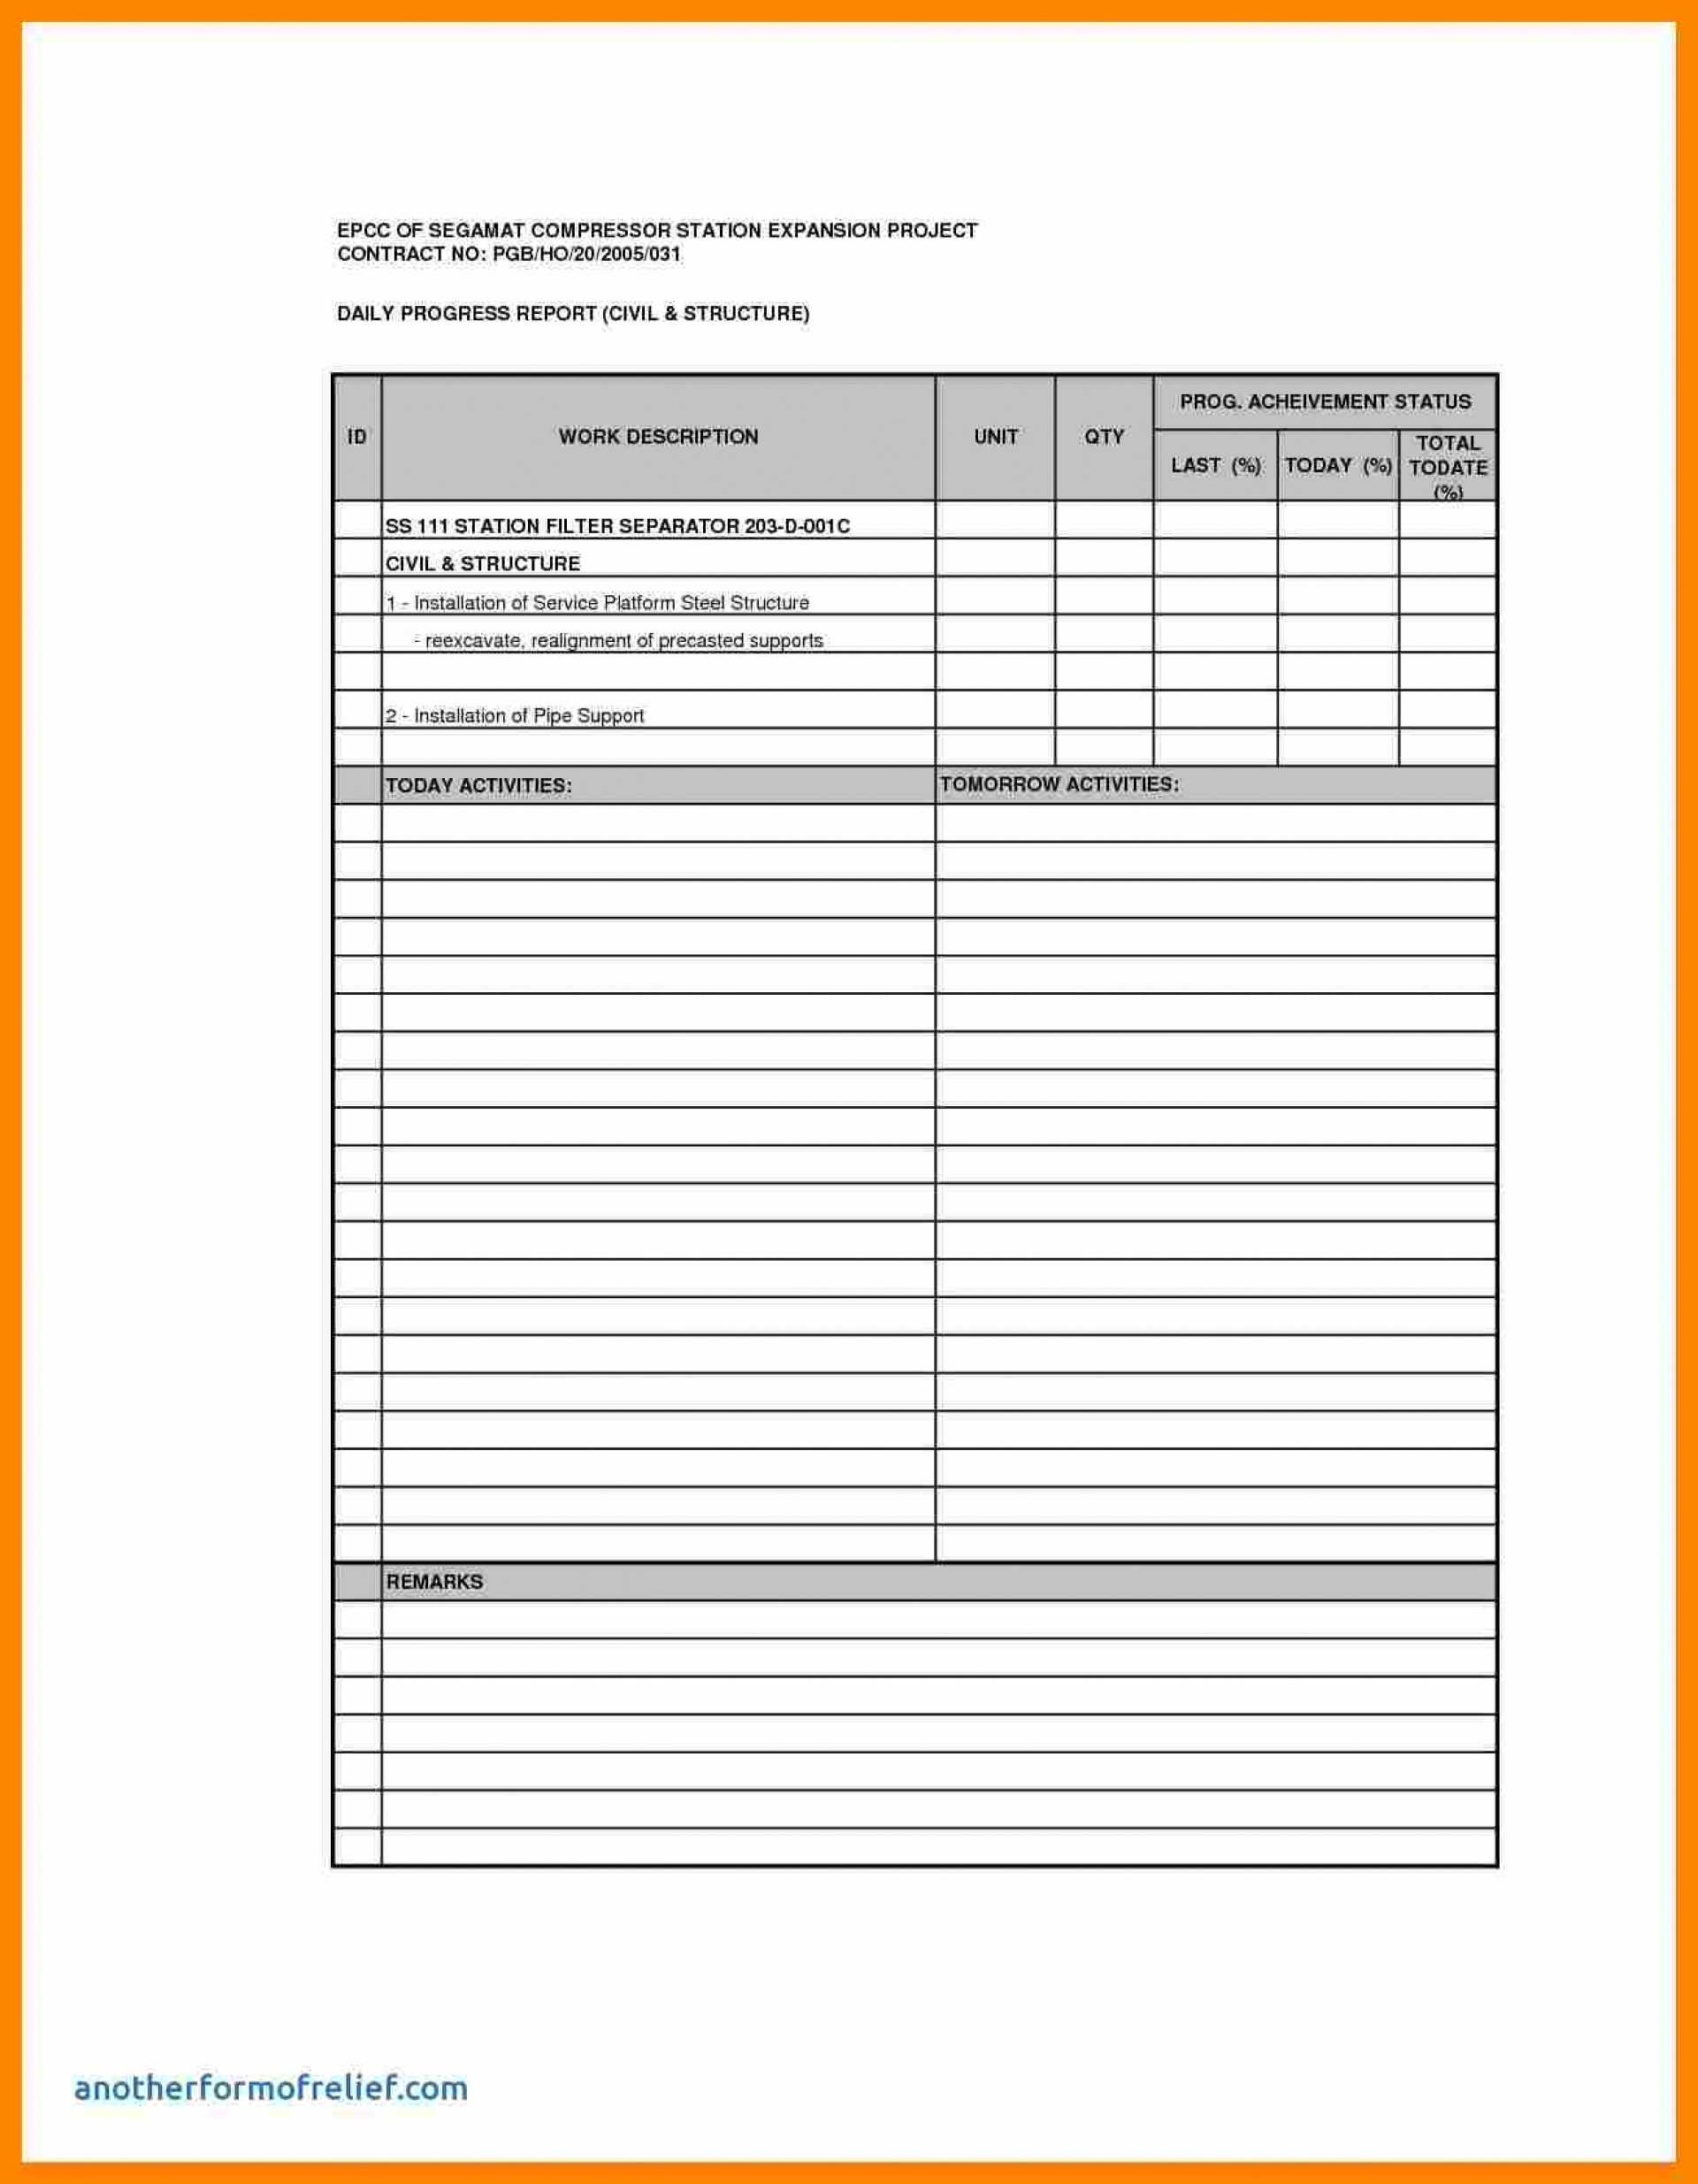 010 Daily Progress Report Format Construction Status For Best Report Format Template